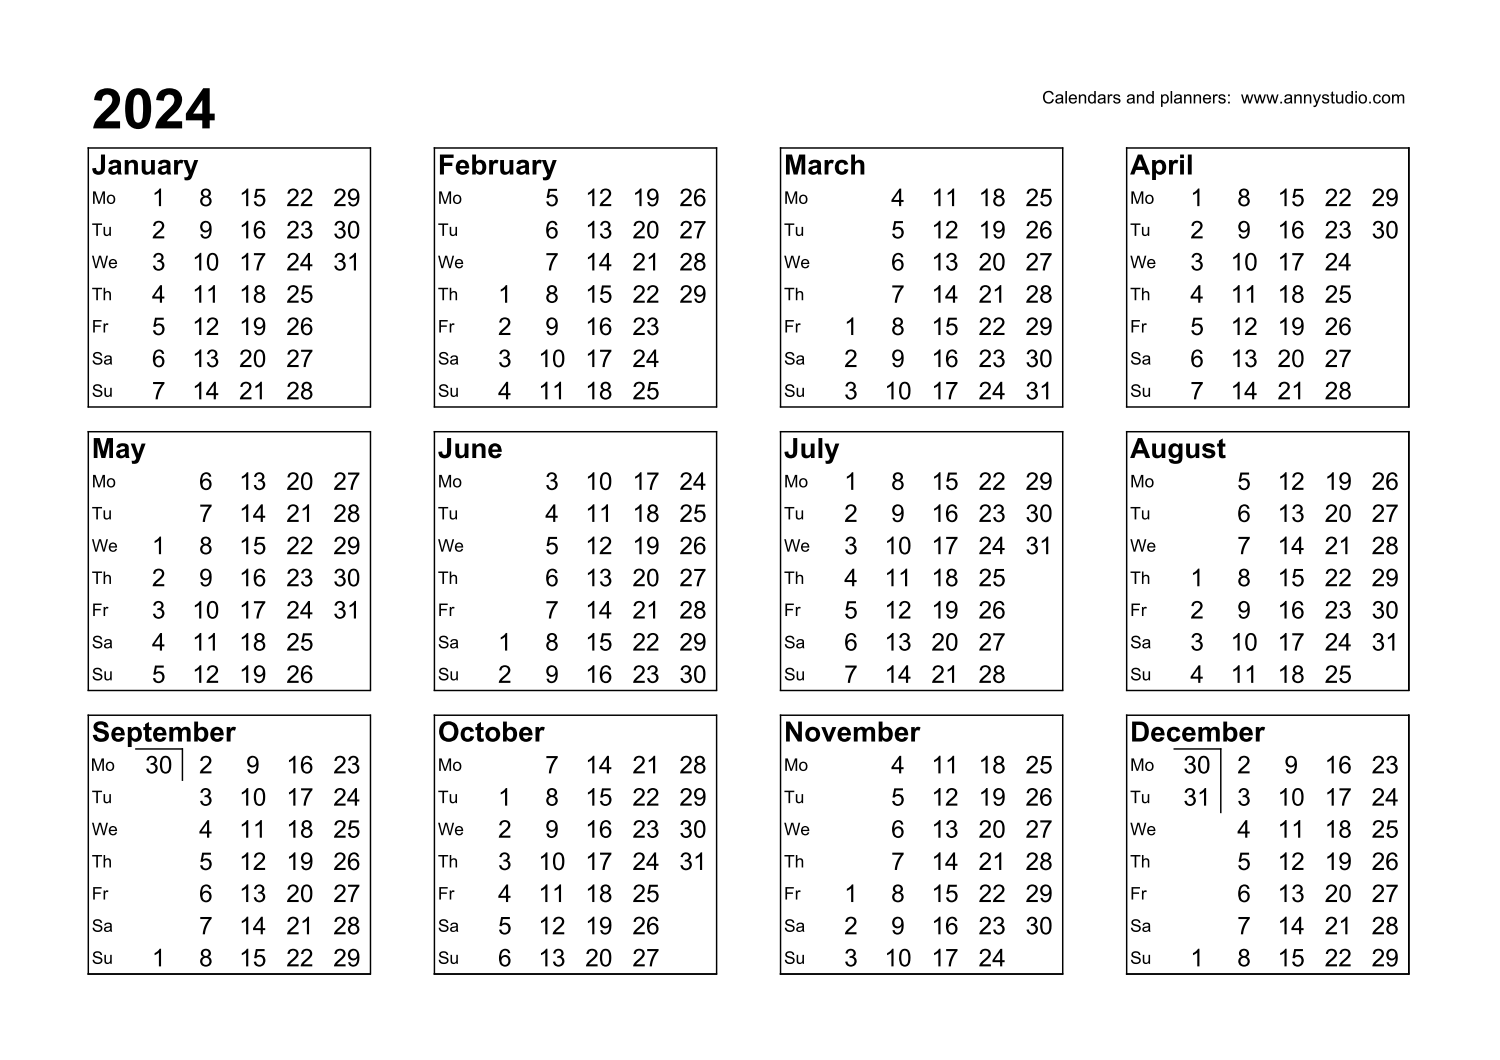 Free Printable Calendars And Planners 2024, 2025 And 2026 for 2024 Calendar With Week Numbers Printable Free